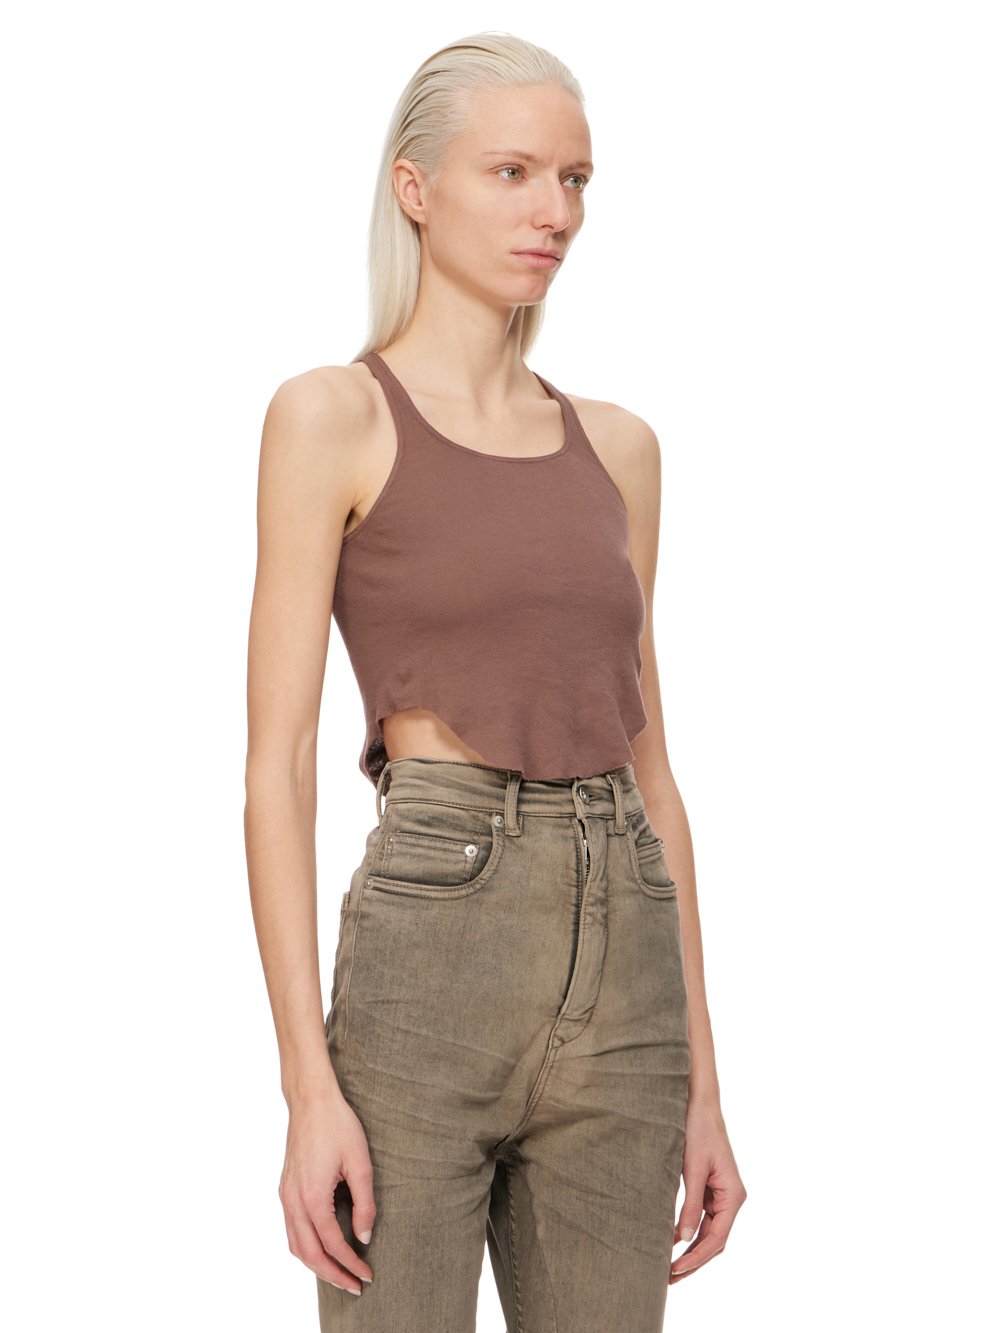 DRKSHDW FW23 LUXOR BASIC TANK CROPPED IN MAUVE LIGHTWEIGHT COTTON GAUZE JERSEY 